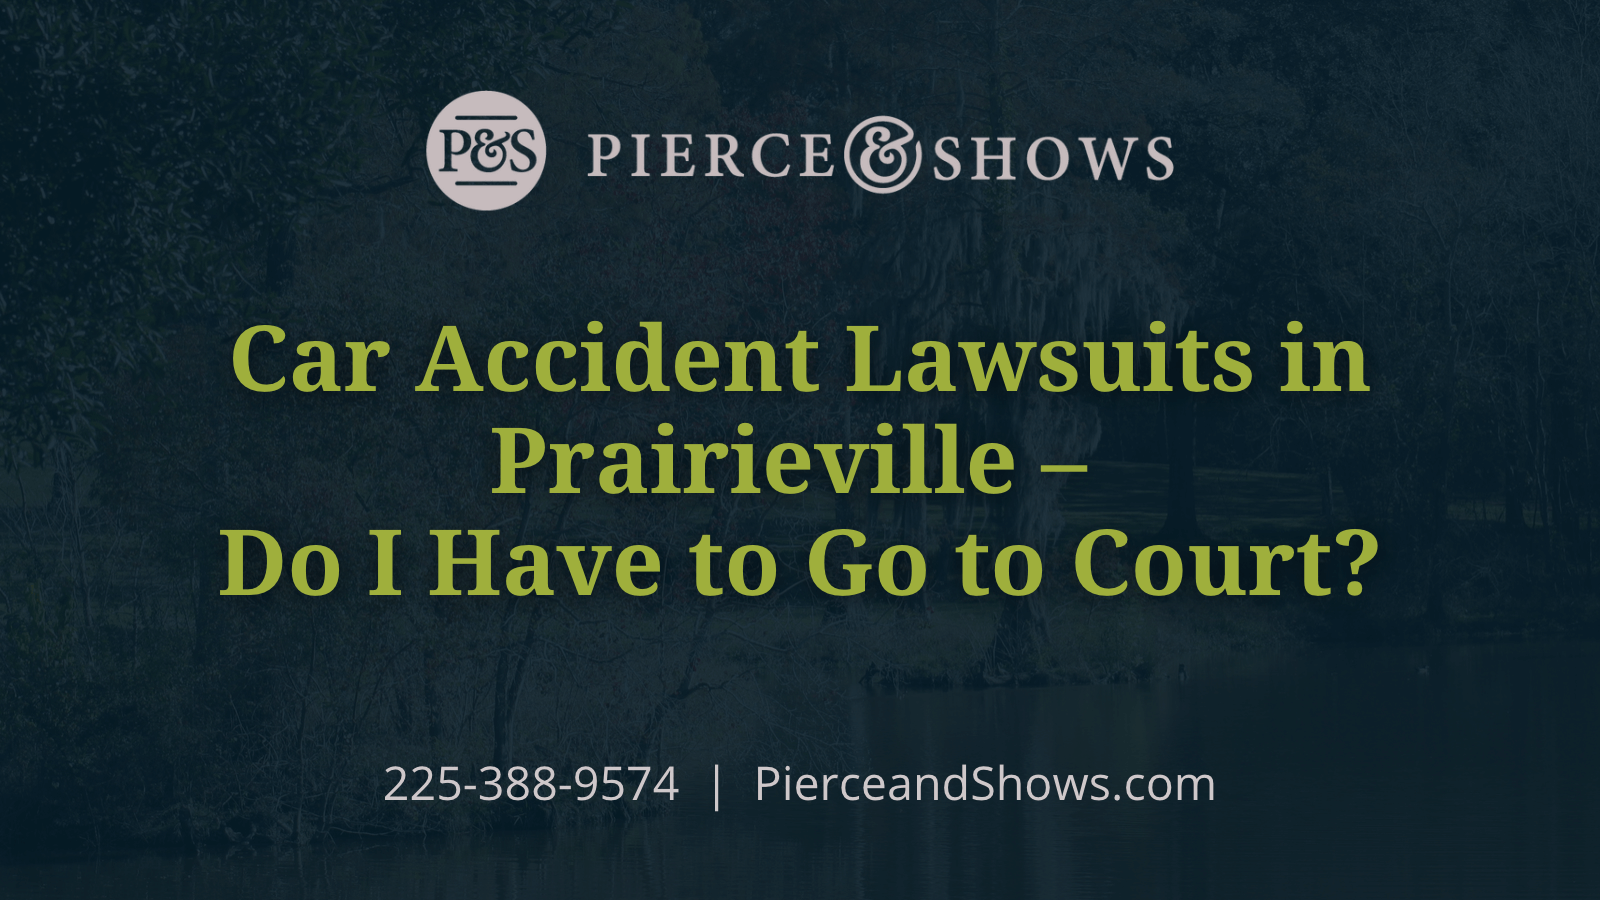 Car Accident Lawsuits in Prairieville – Do I Have to Go to Court - Baton Rouge Louisiana injury attorney Pierce & Shows